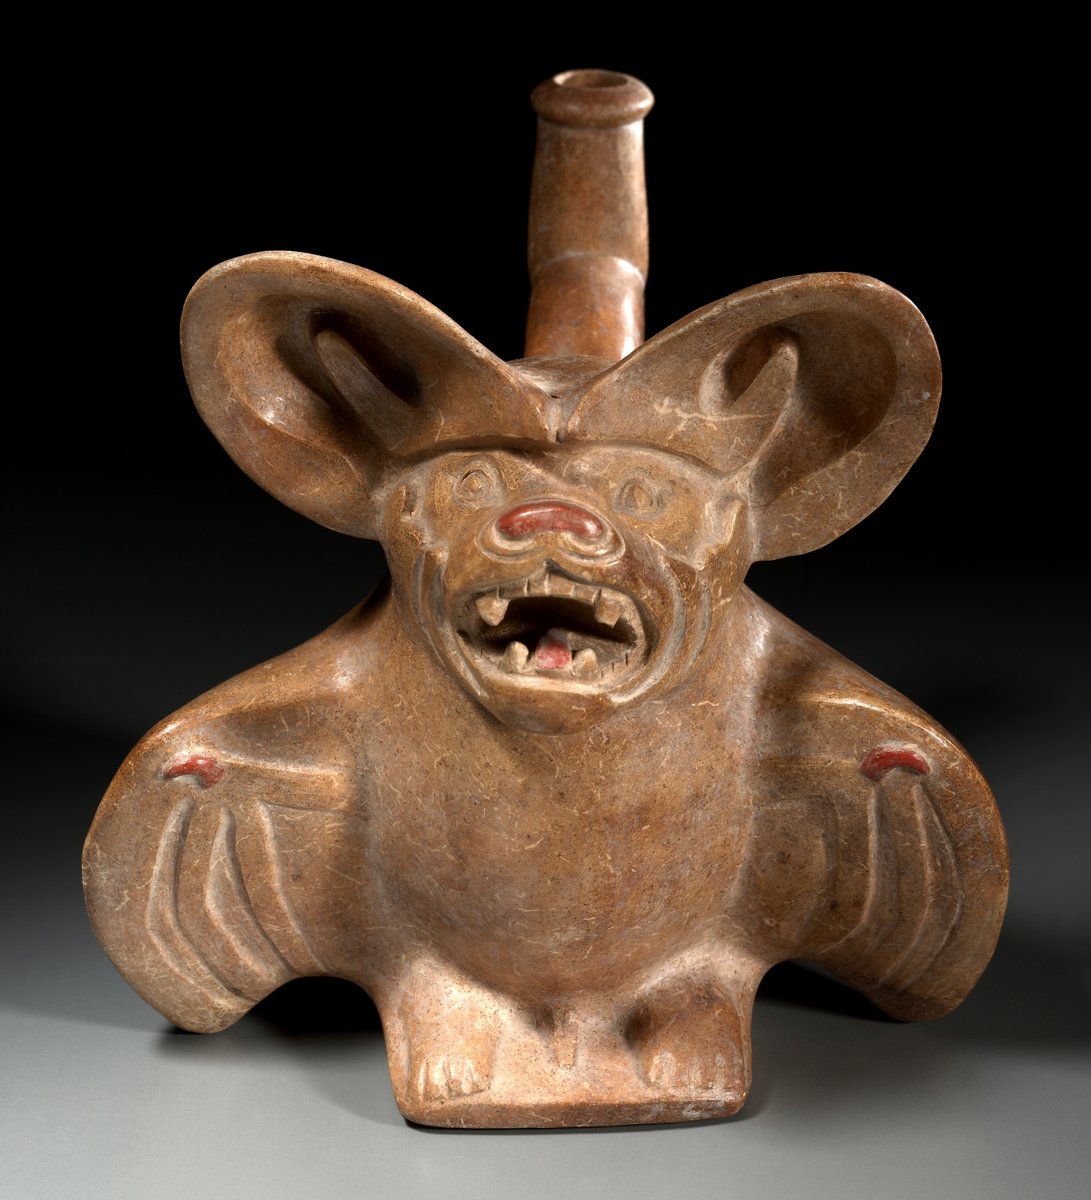 Big-Eared Brown Bat Vessel. c. AD 200–850. Culture & Geography: Central Andes, North Coast, Moche people, Early Intermediate period. Overall: 18.4 x 17.7 x 15.8 cm. Collection: Cleveland Art Museum, US.